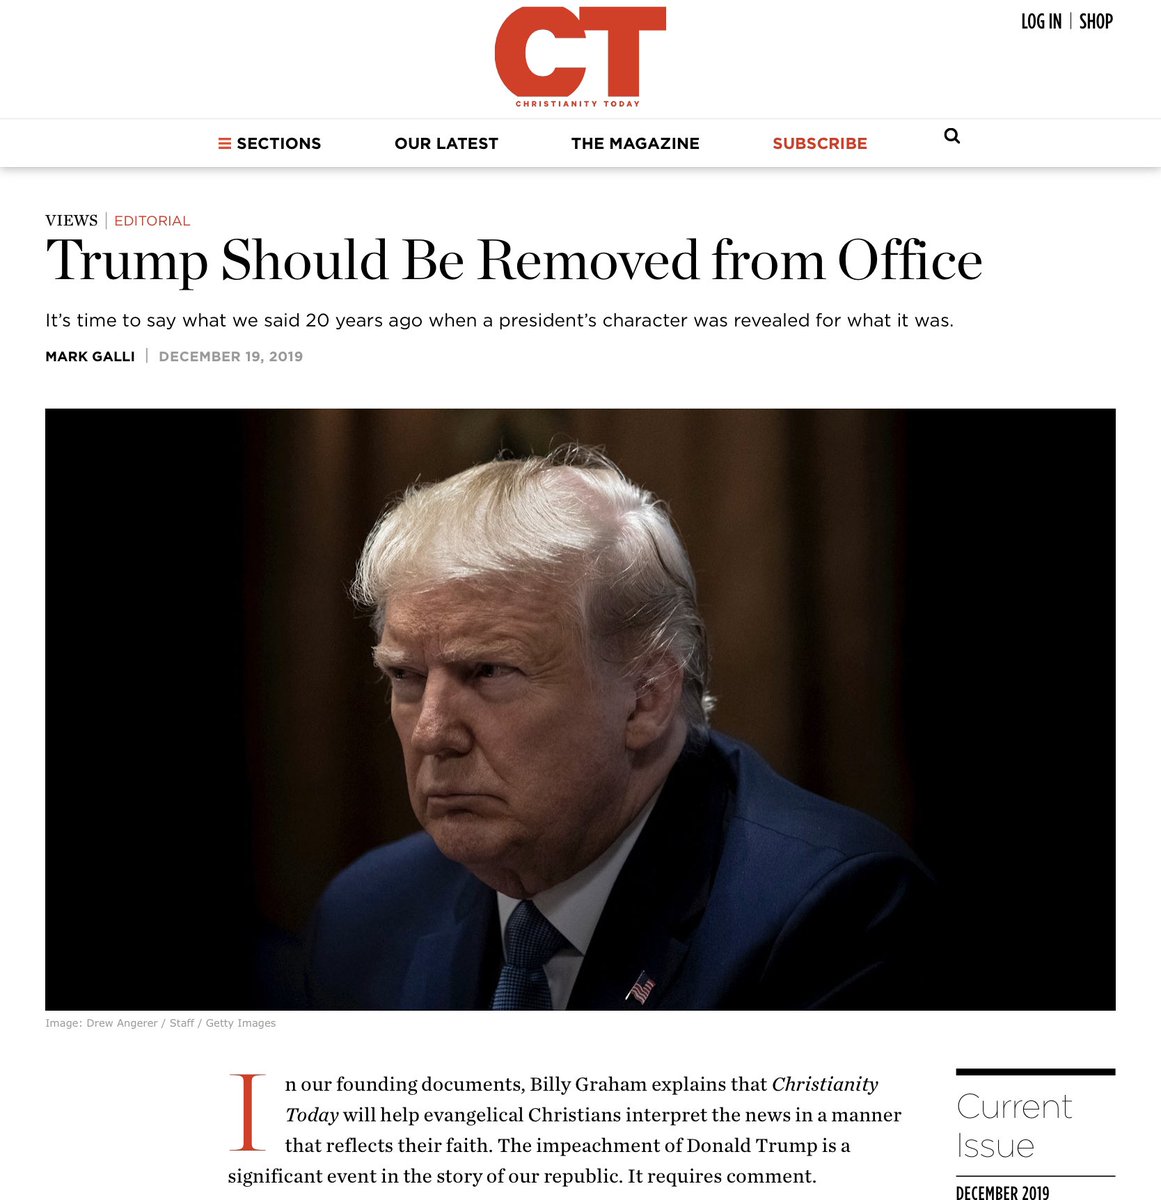 Thank you  @markgalli and  @CTmagazine for finding the moral courage to break nearly 3 years of silence on the indefensible support of evangelicals for a morally degenerate, unrepentant, racist, demagogue & calling for his removal from office as POTUS. https://www.christianitytoday.com/ct/2019/december-web-only/trump-should-be-removed-from-office.html6/6